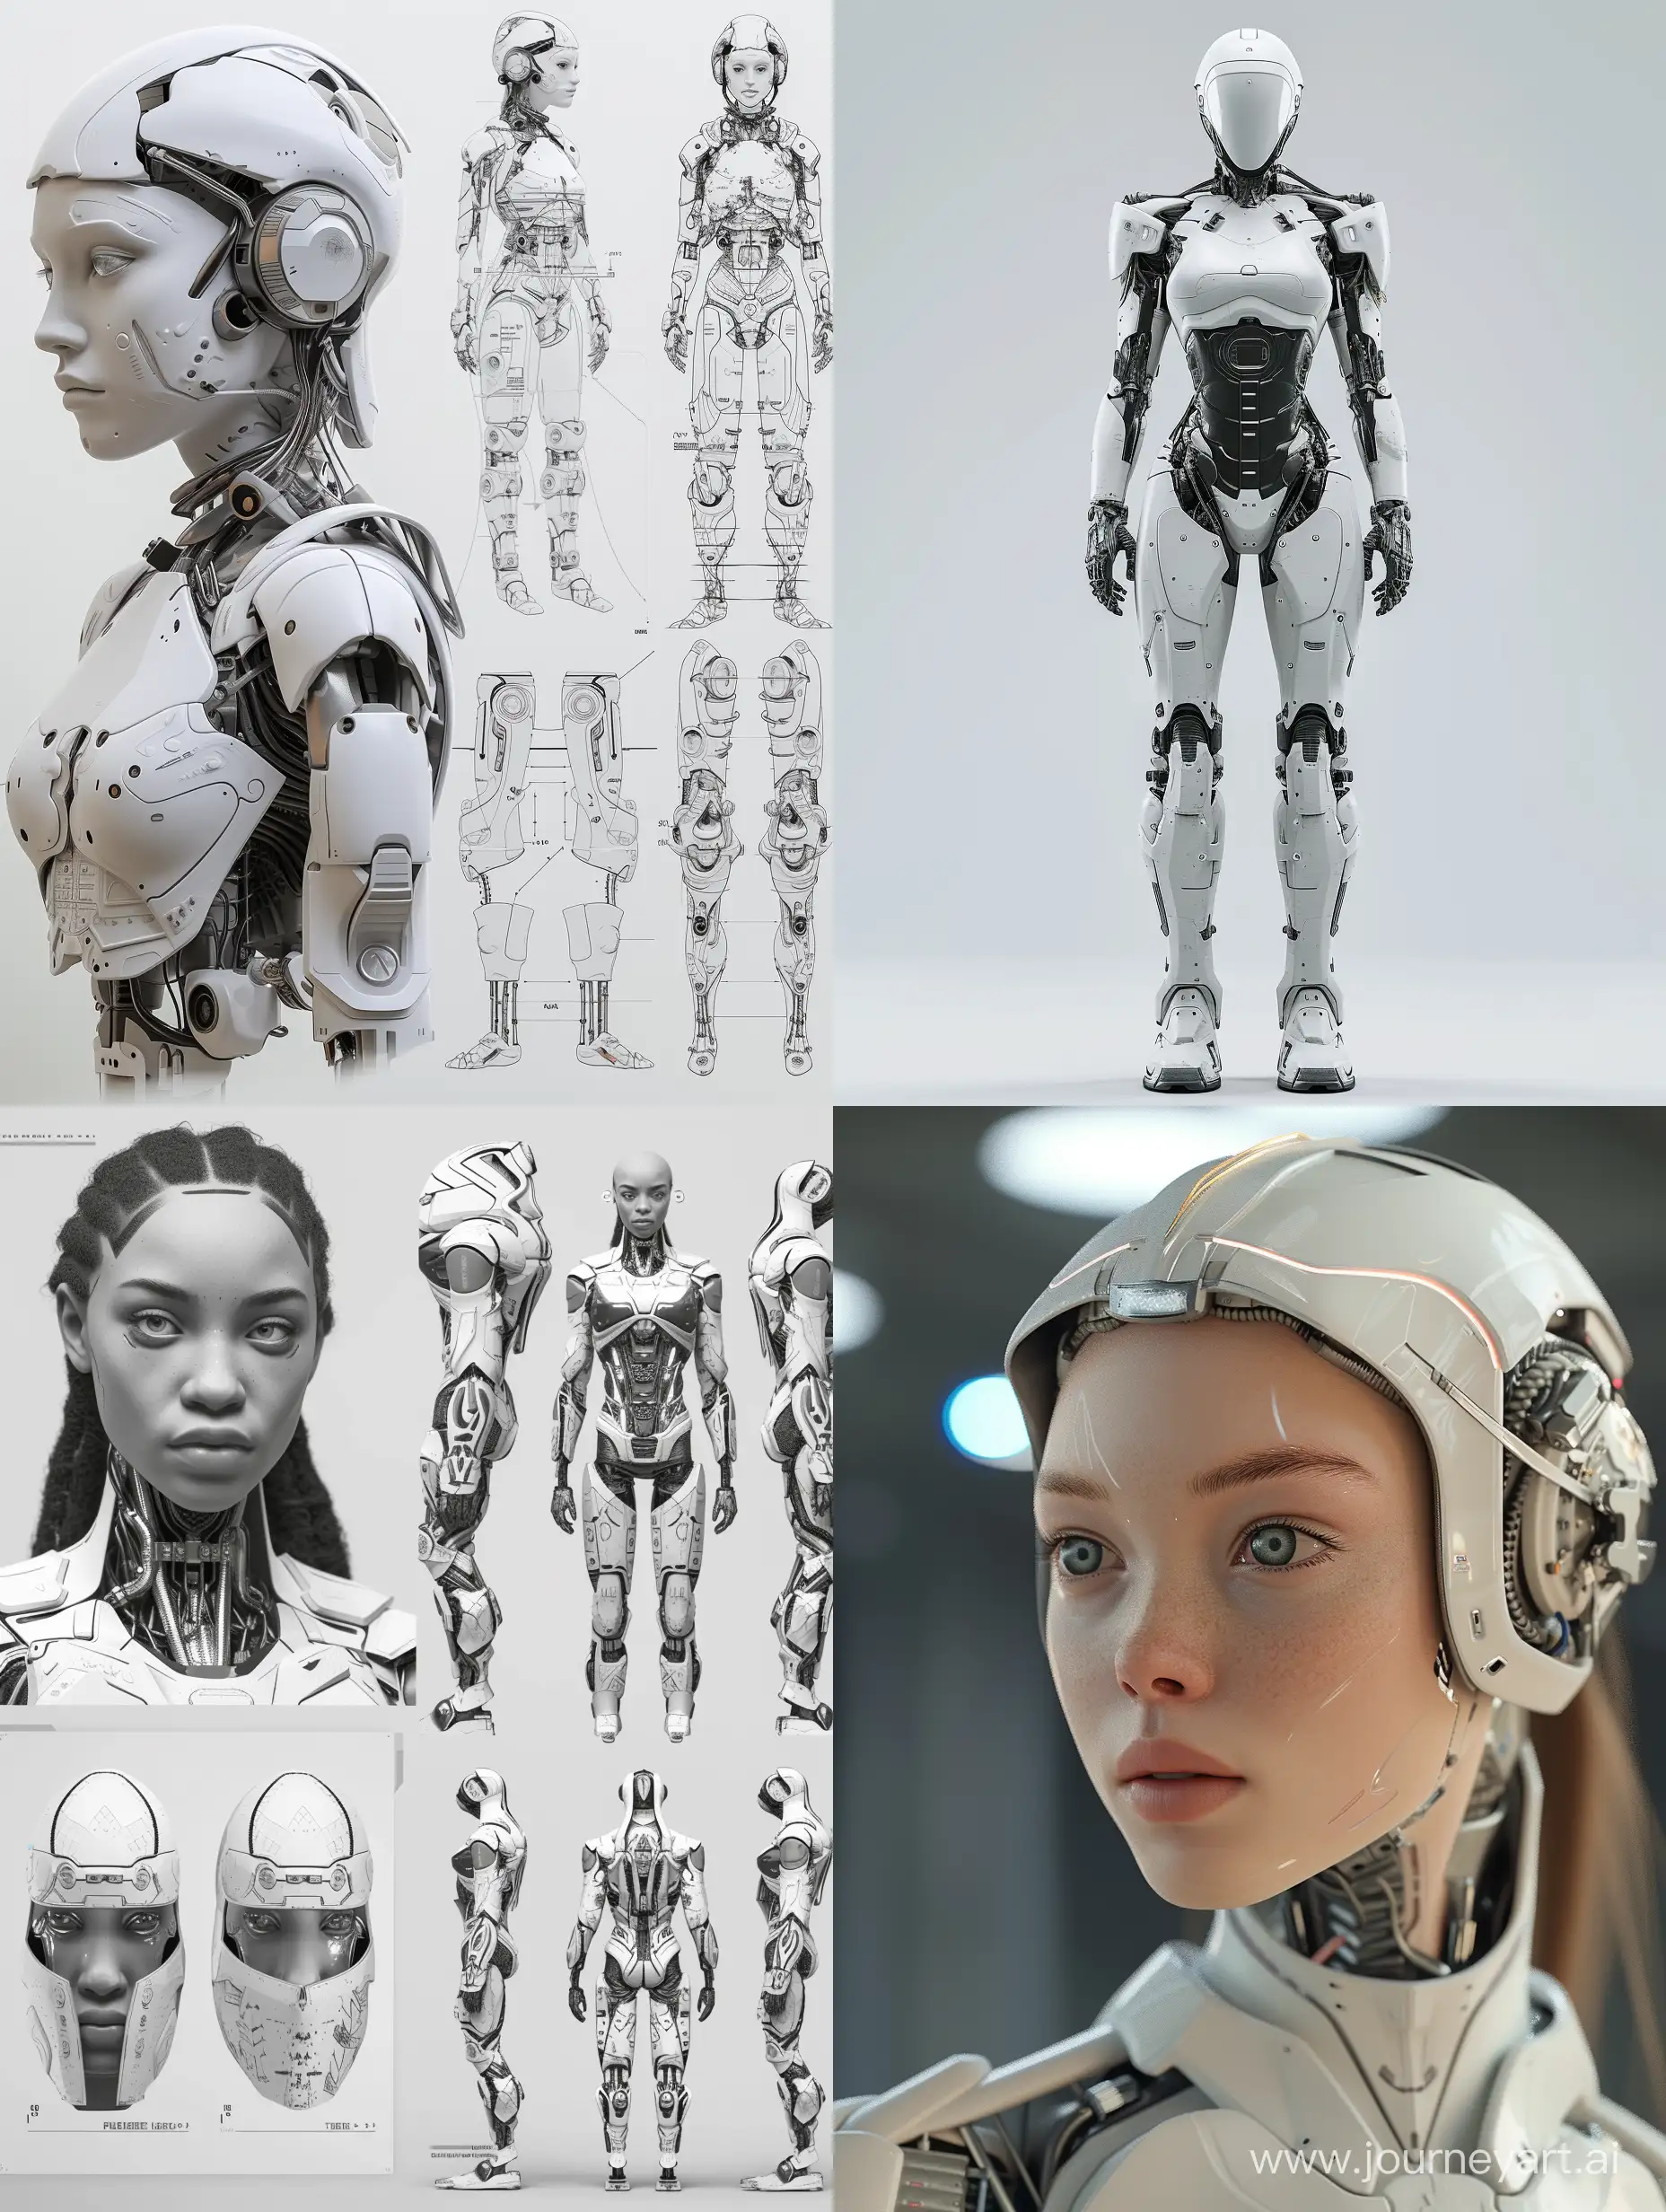 Futuristic-Female-Android-Character-Sheet-3D-Render-Illustration